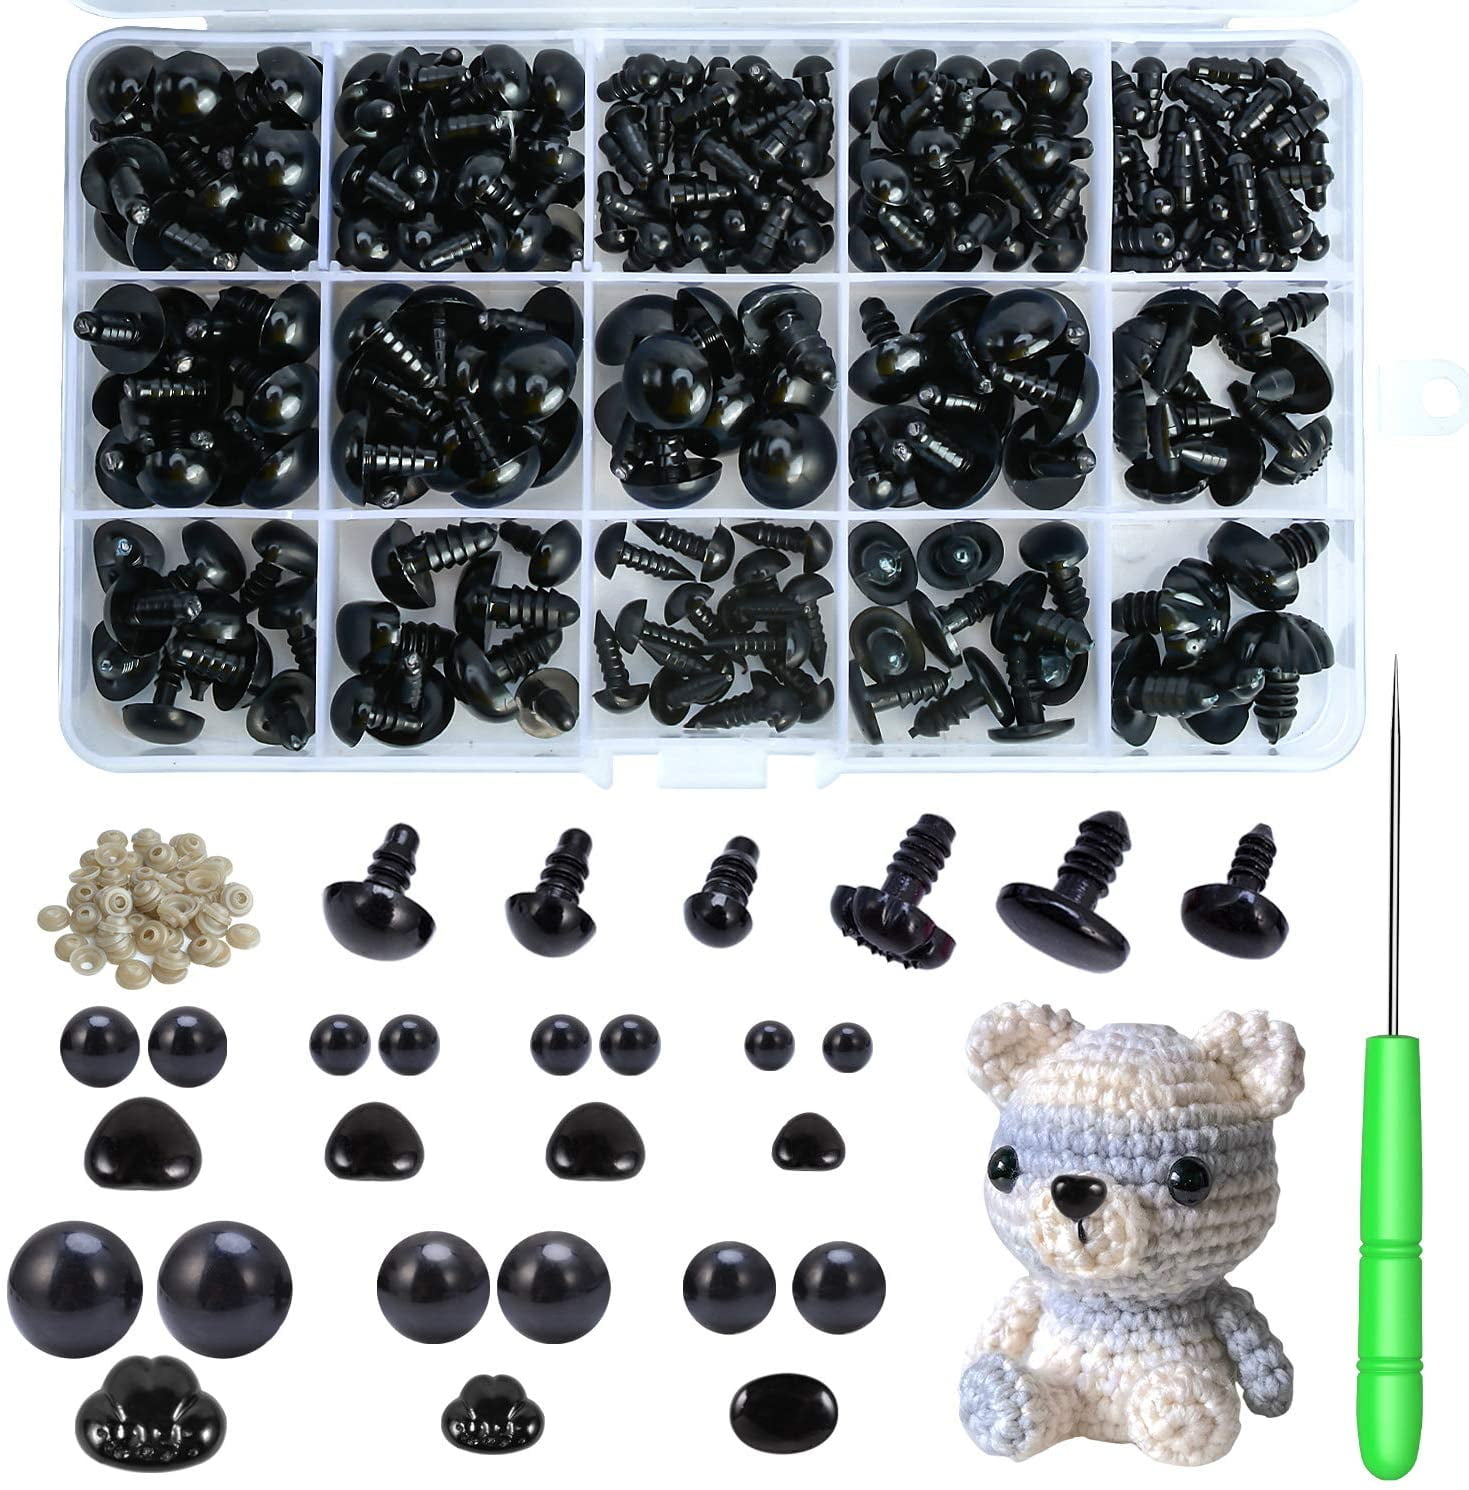 105pcs Teddy Bear Eyes & Nose Set, 7 Sizes Of Black Eyes And 6 Sizes Of  Safety Eyes, For Knitted Toys, Stuffed Animals, Dolls, Crochet And Sewing